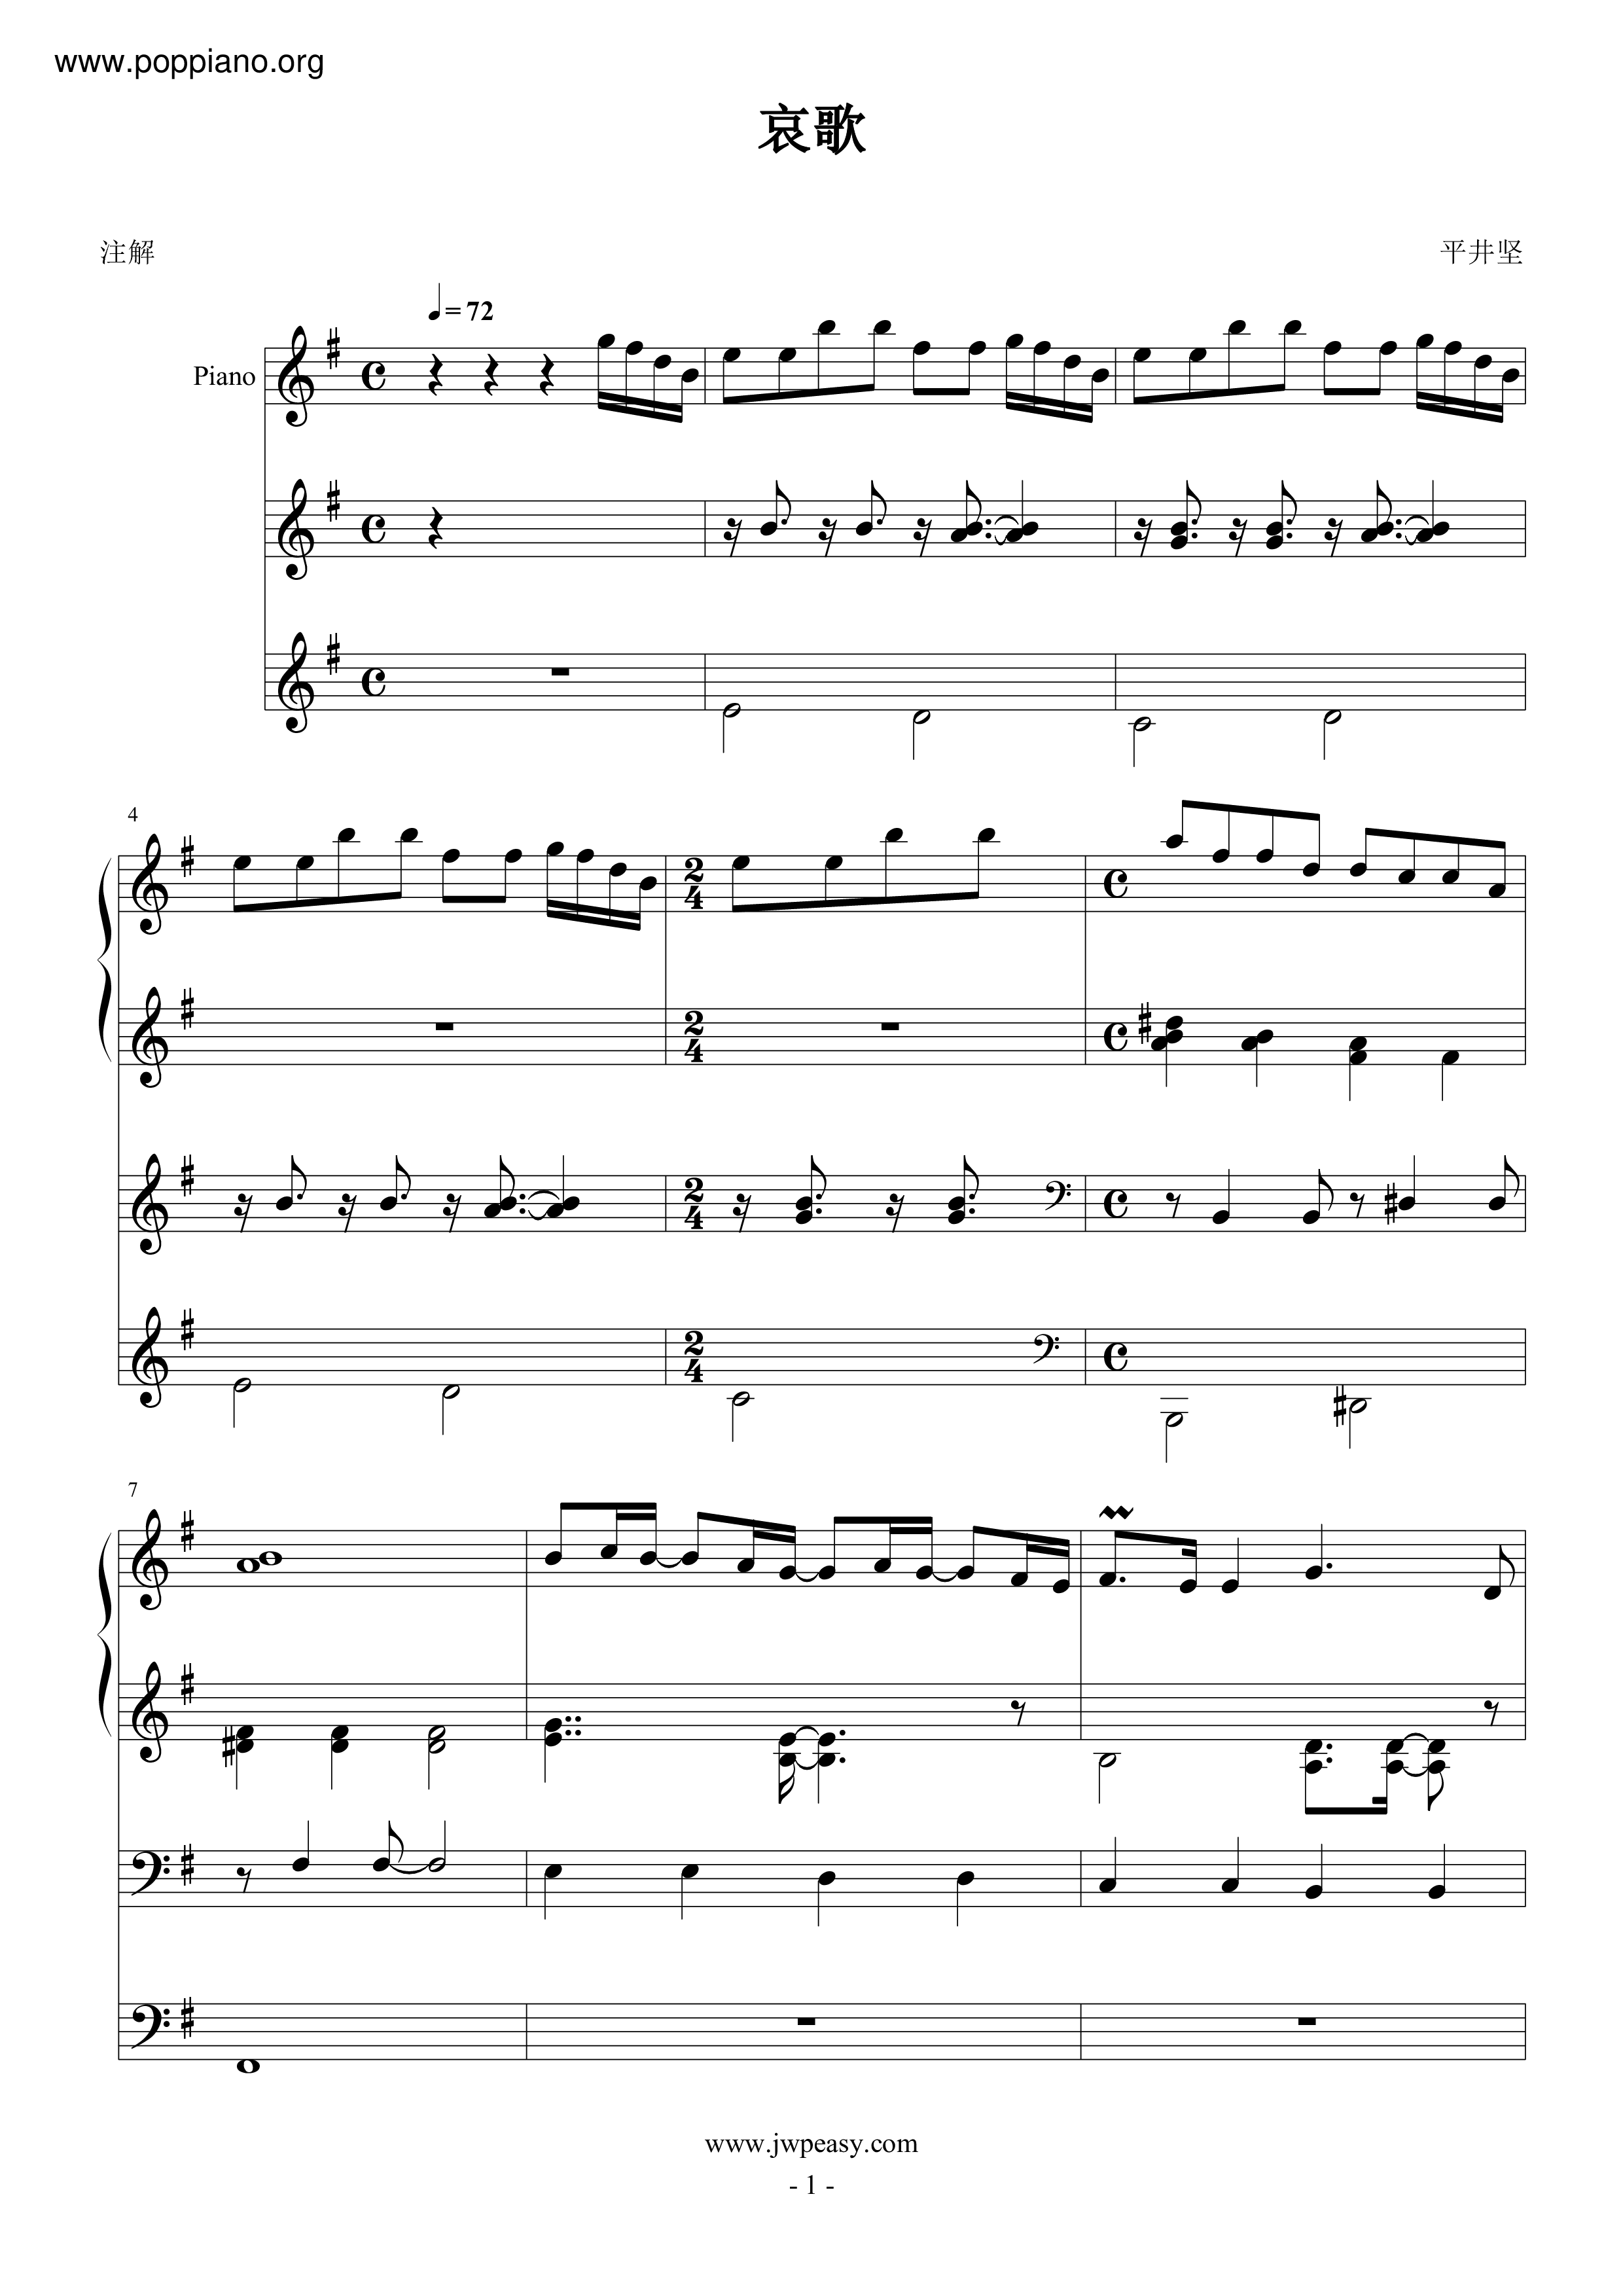 Mourning Song Score